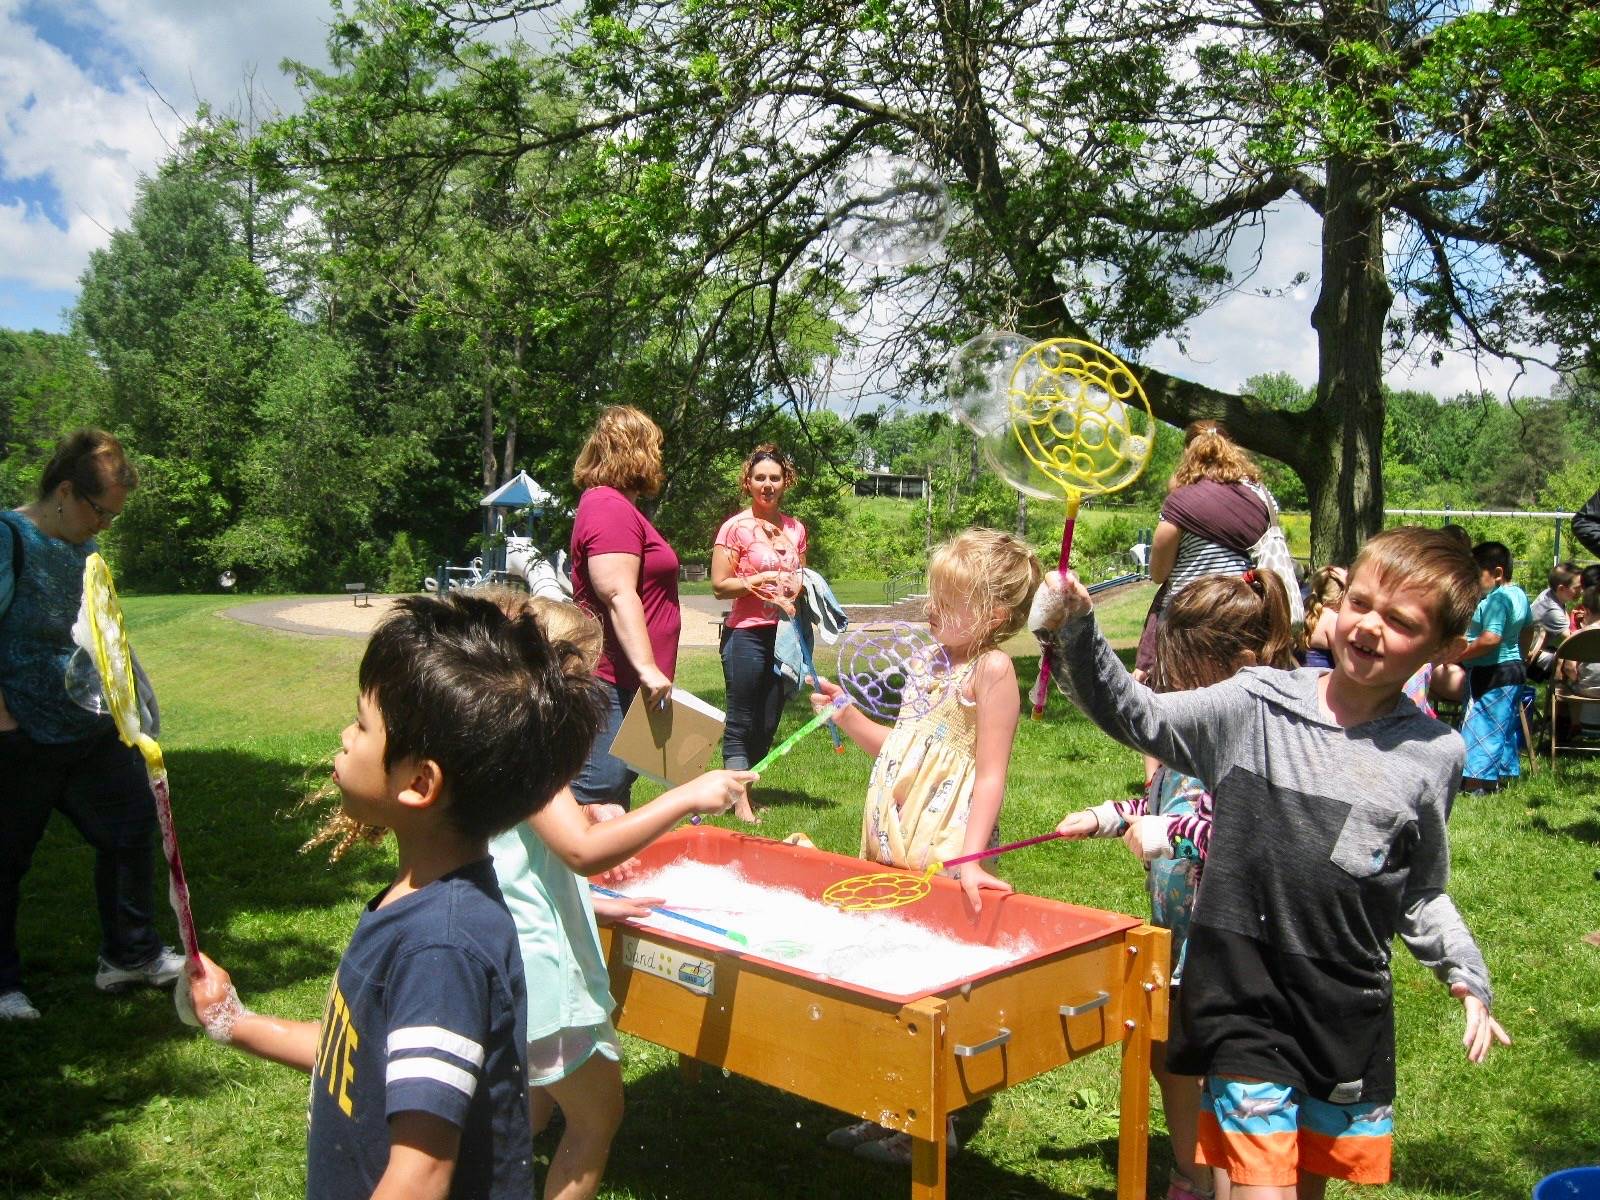 A group of students playing with bubbles.